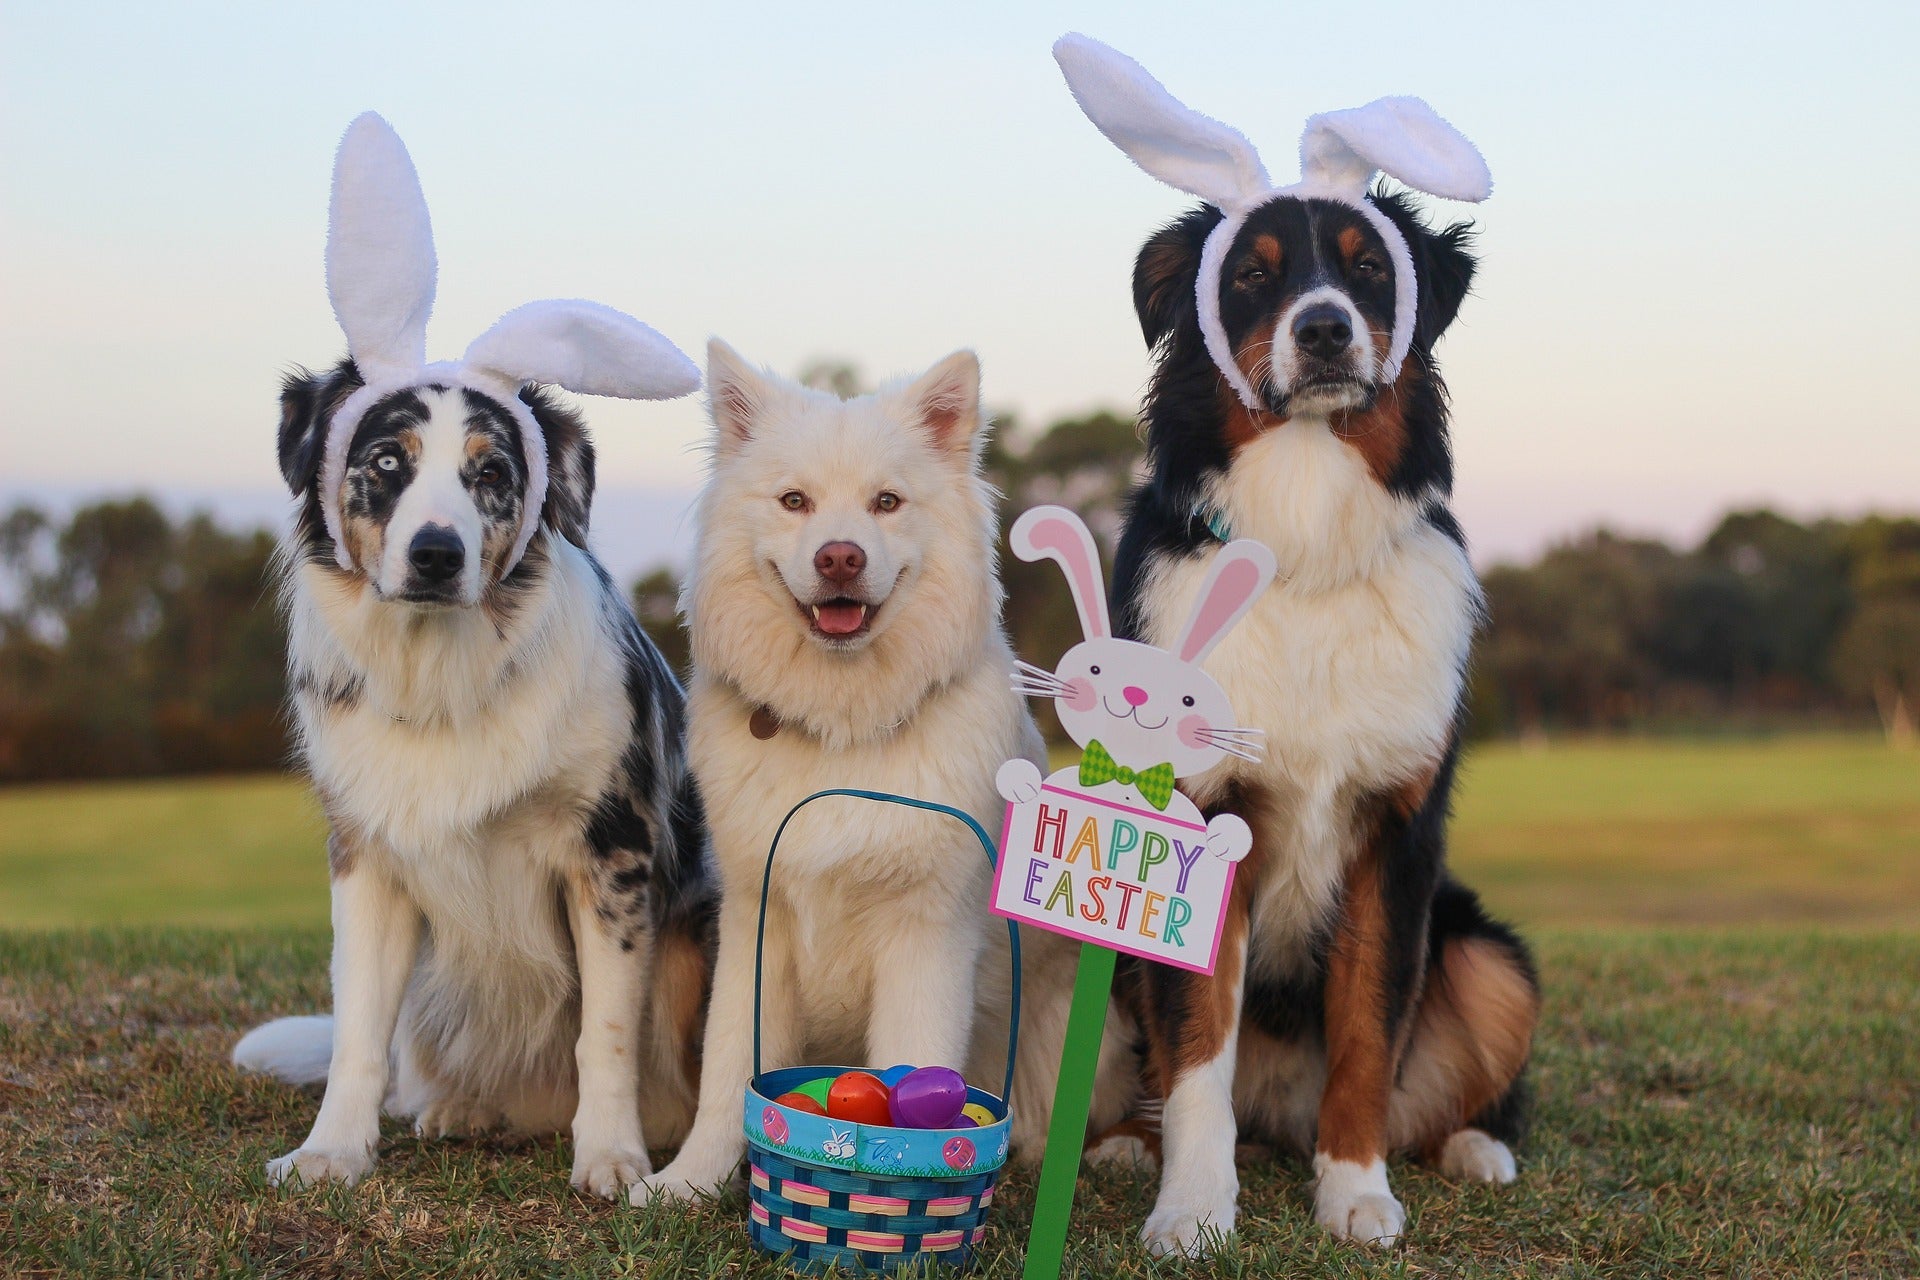 How to Celebrate Easter With Your Fur Baby